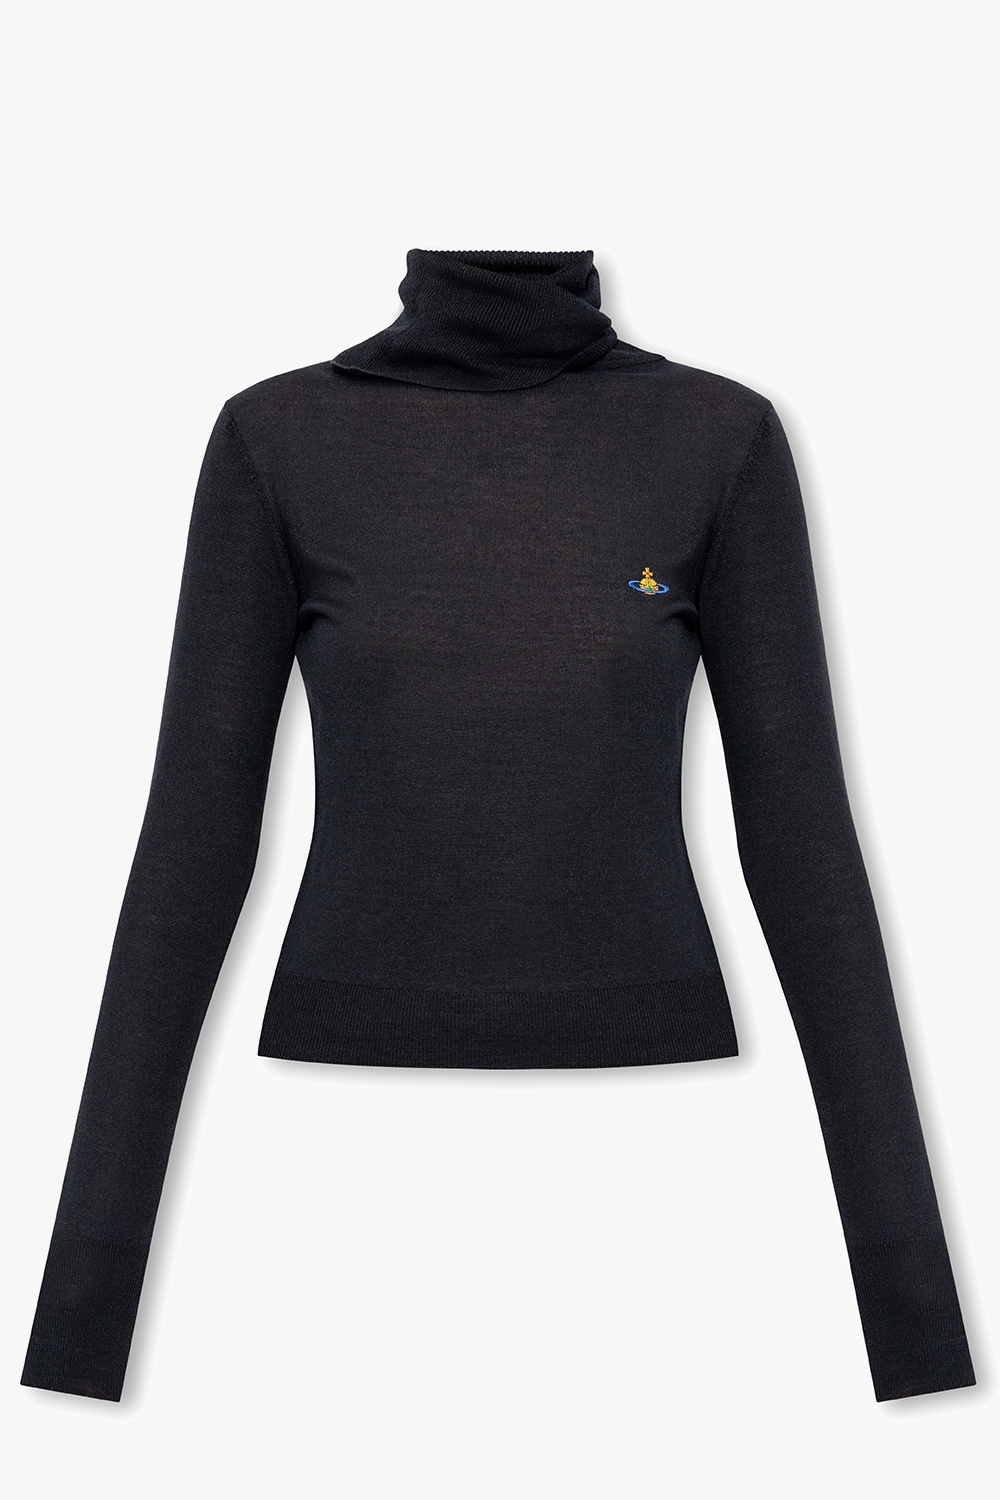 Vivienne Westwood Turtleneck sweater with logo | Women's Clothing